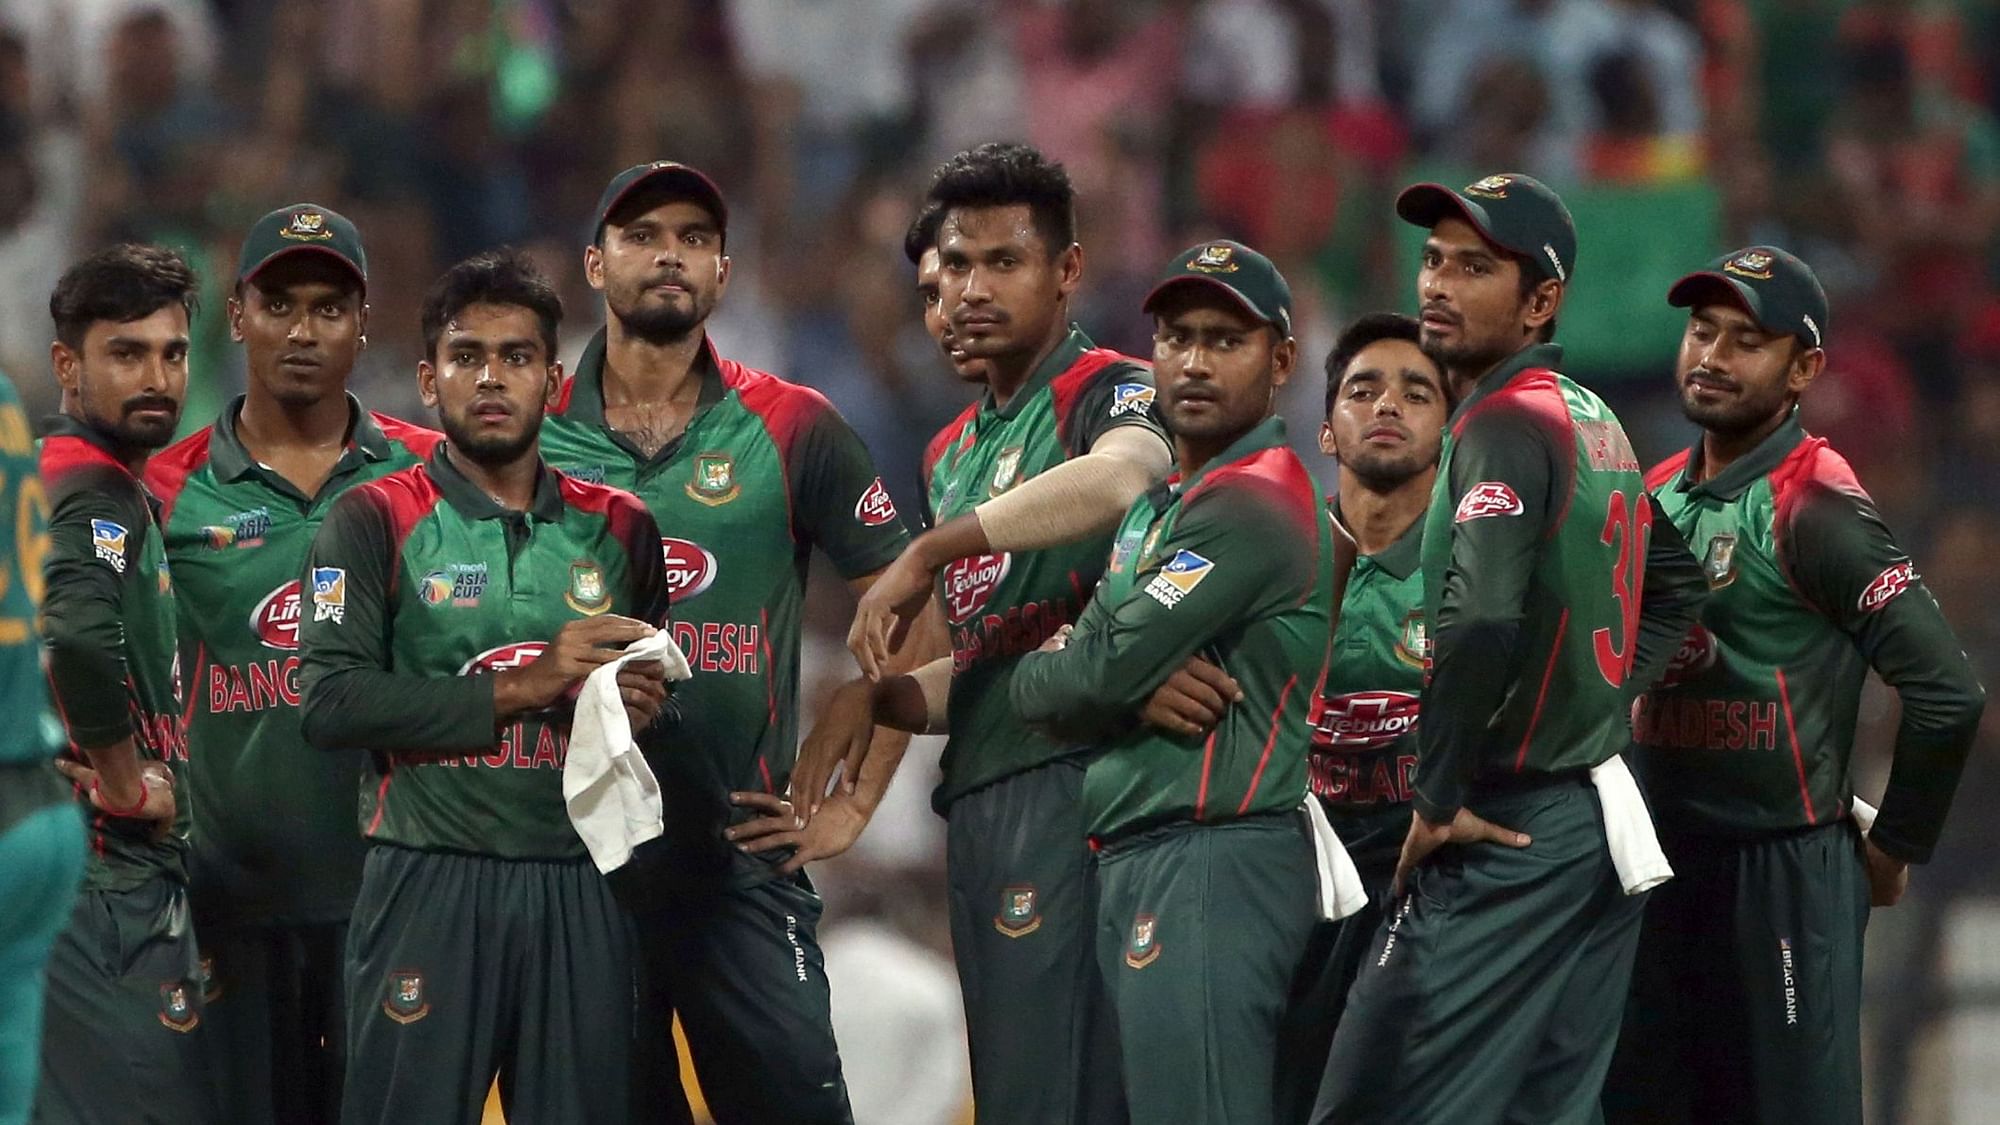 Bangladesh could be relied on to spring a surprise at the 2019 ICC World Cup.